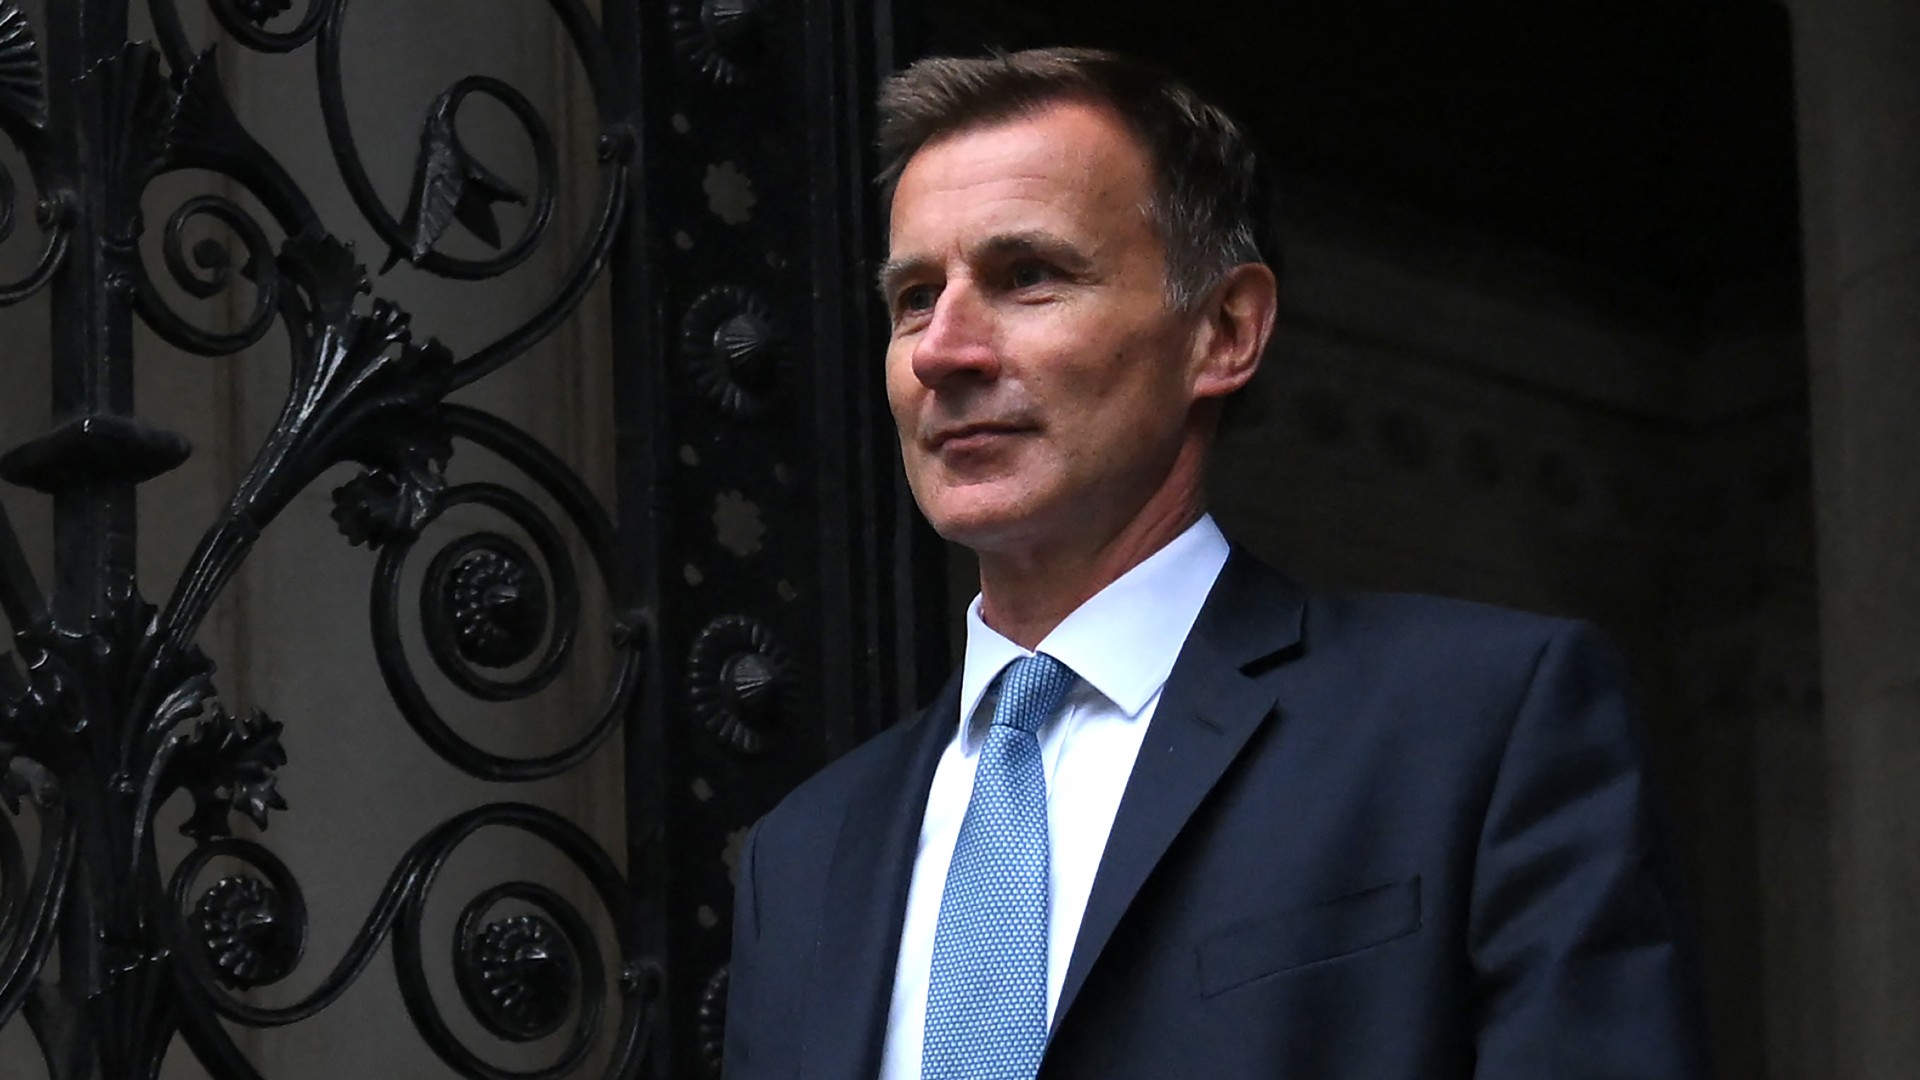 Britain's new Chancellor of the Exchequer Jeremy Hunt arrives in Downing Street in central London on October 14, 2022.